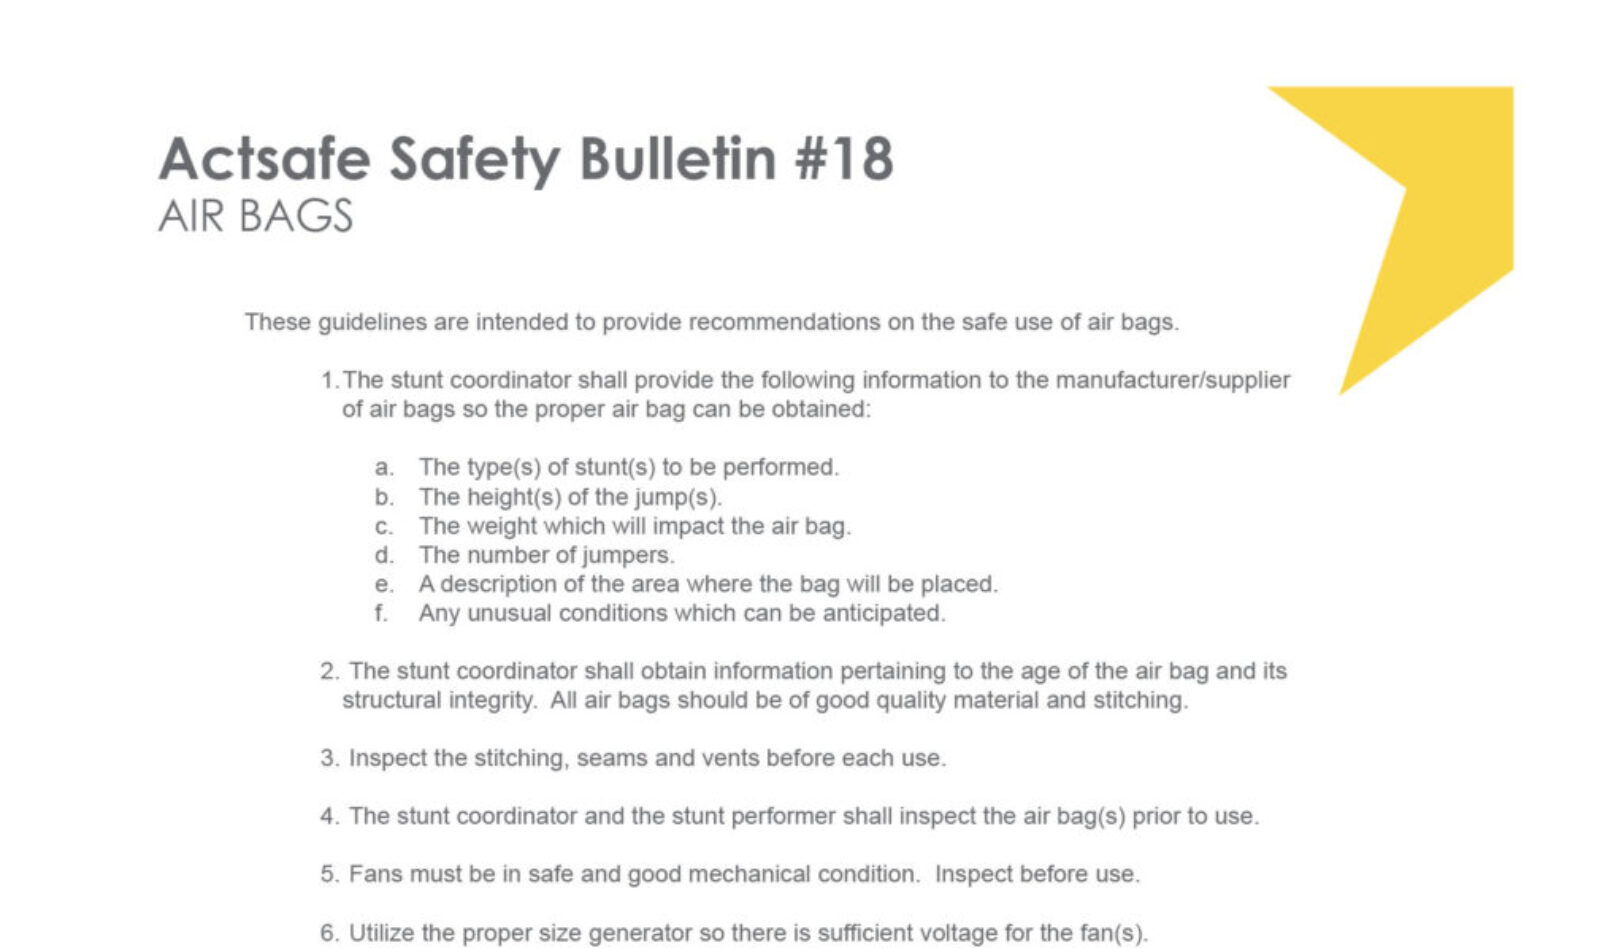 #18 Air Bags Motion Picture Safety Bulletin